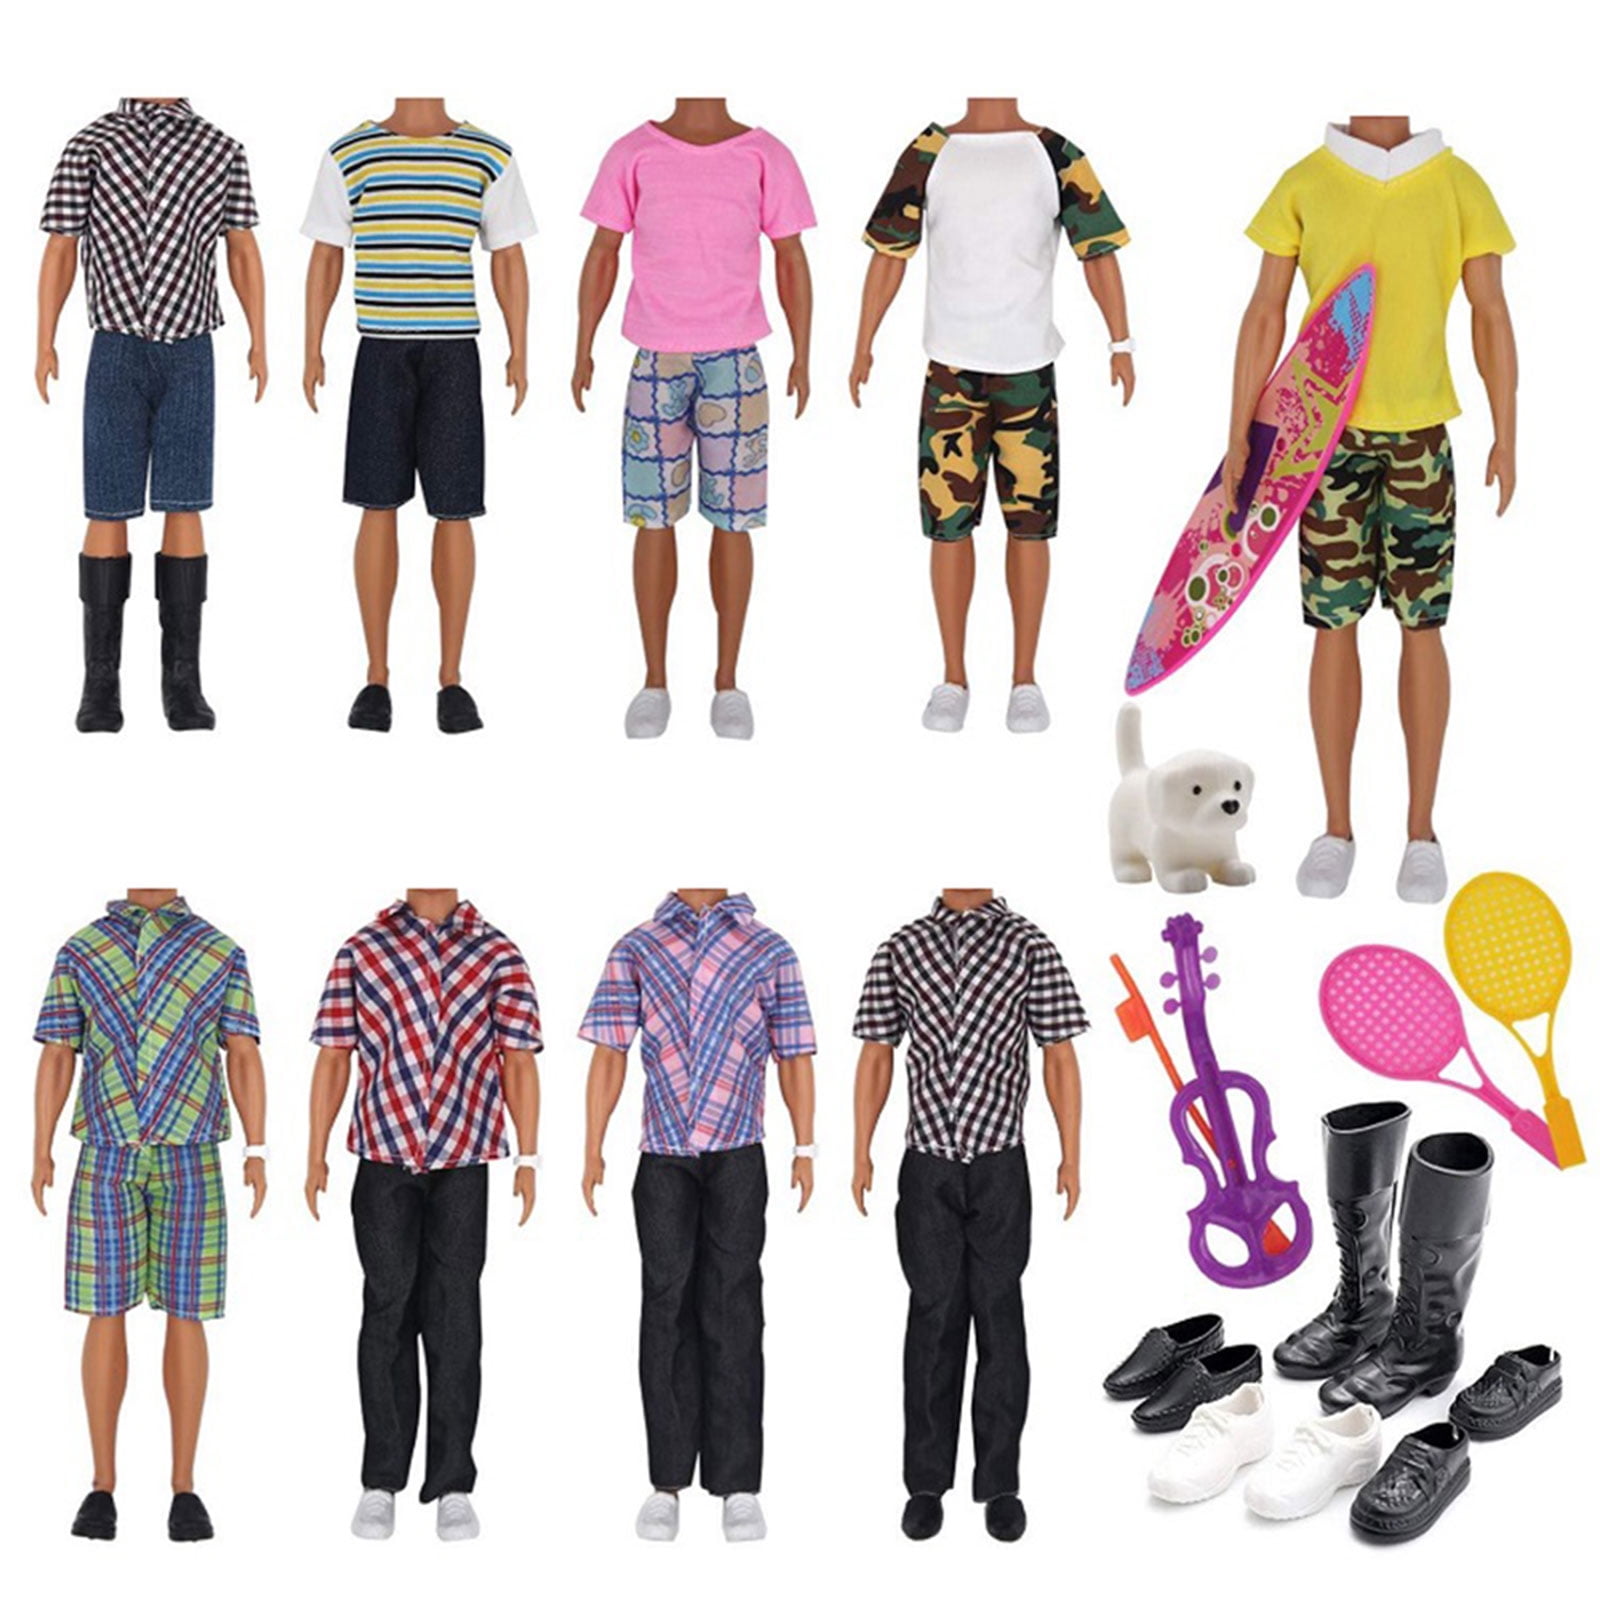  Barbie Ken Fashions 2-Pack Clothing Set, 1 Outfit & Accessory  for Barbie Doll: Tropical Dress & Tote; 1 Outfit & Accessory for Ken Doll:  Jersey & Board Shorts, Gift for Kids